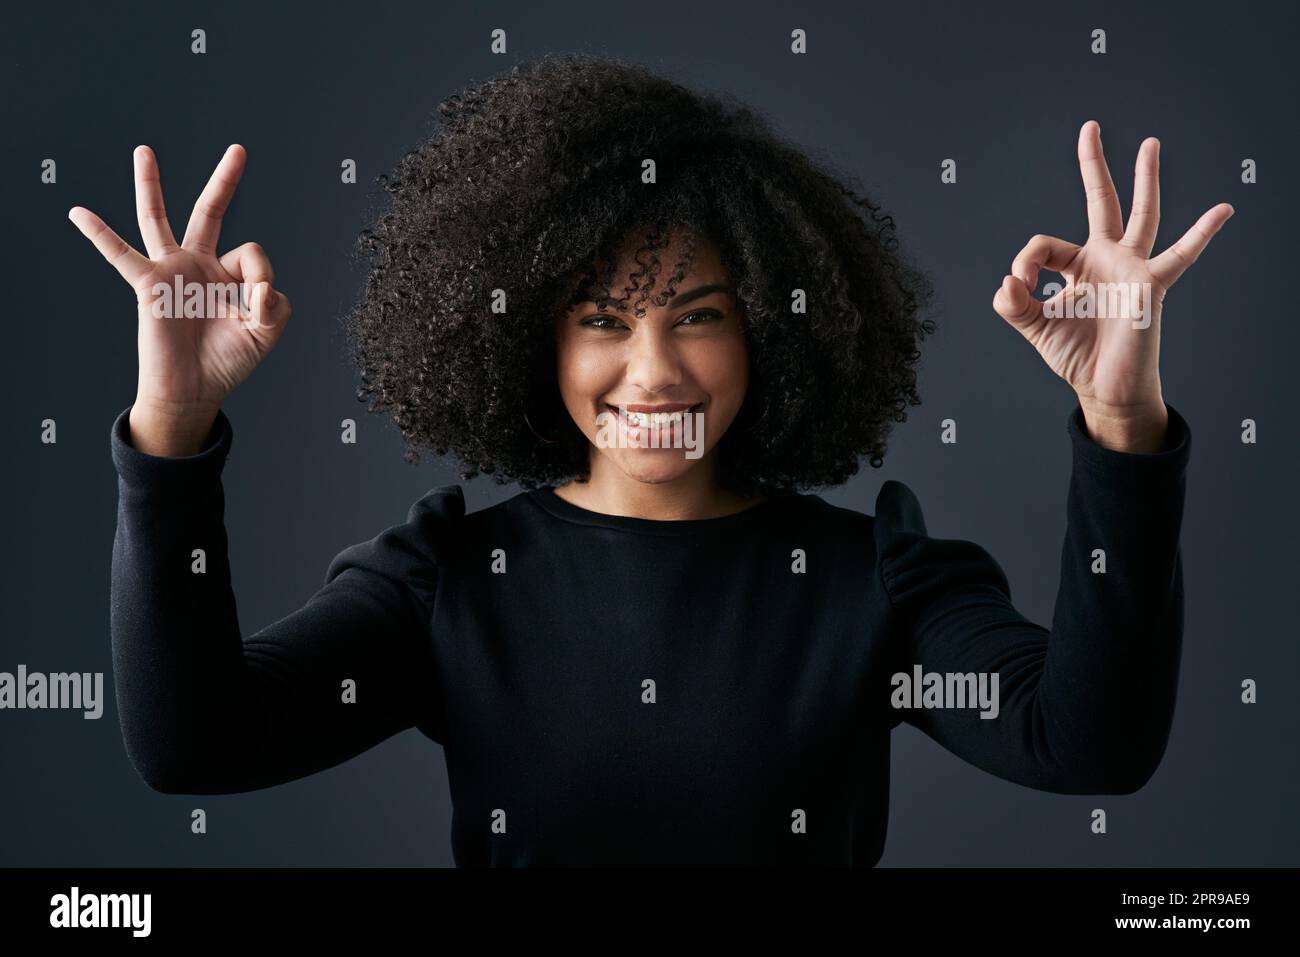 Find your happy place. a young businesswoman making hand gestures against a studio background. Stock Photo